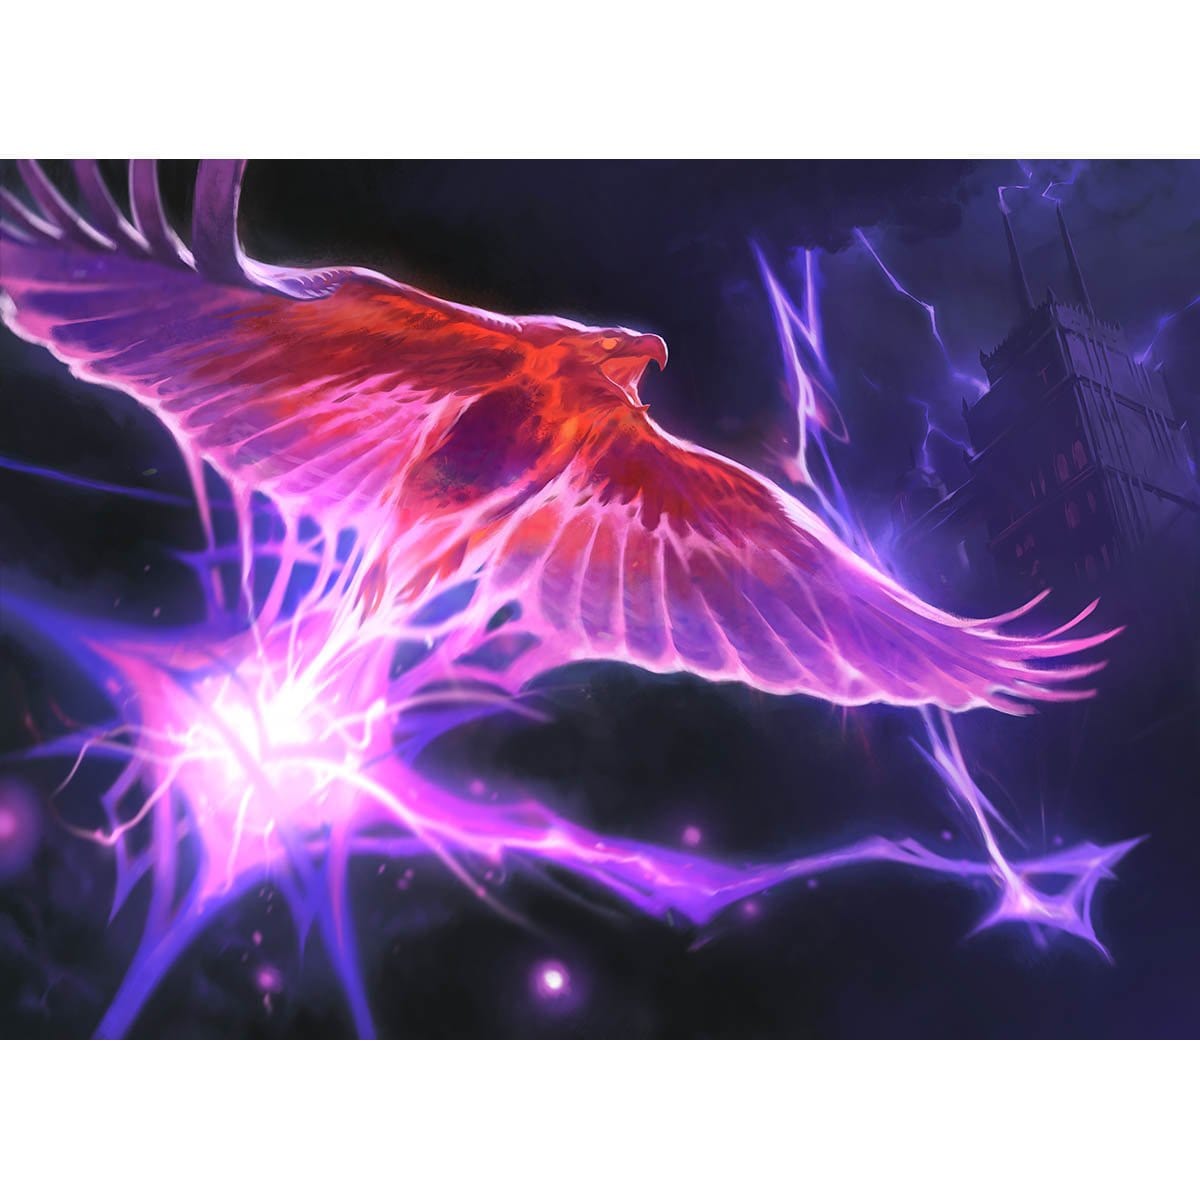 Arclight Phoenix Print - Print - Original Magic Art - Accessories for Magic the Gathering and other card games